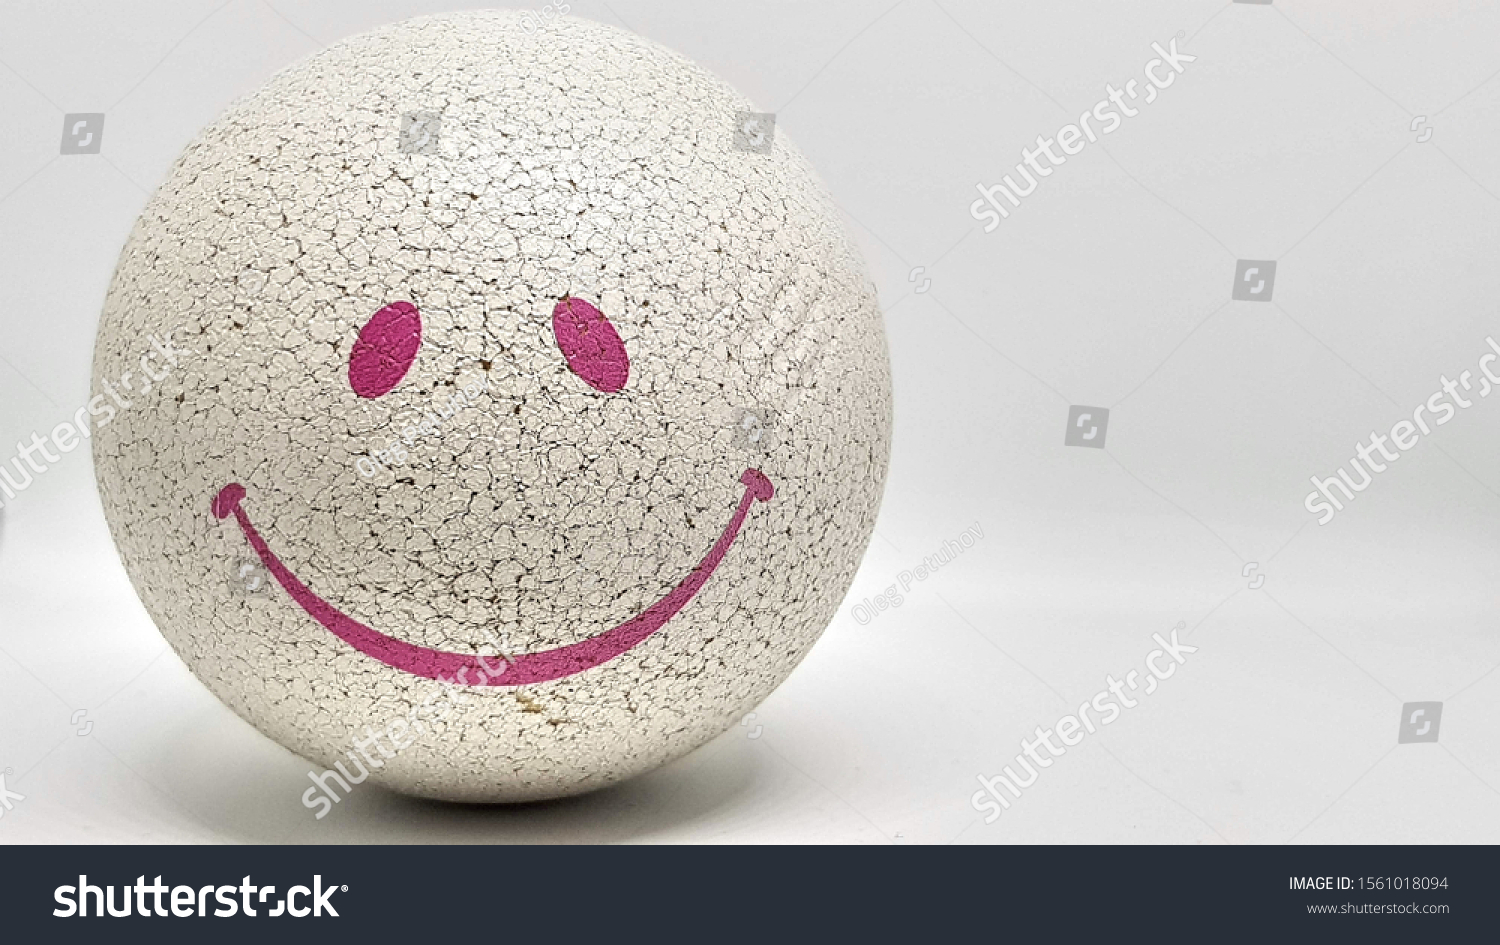 ball with a smile face #1561018094